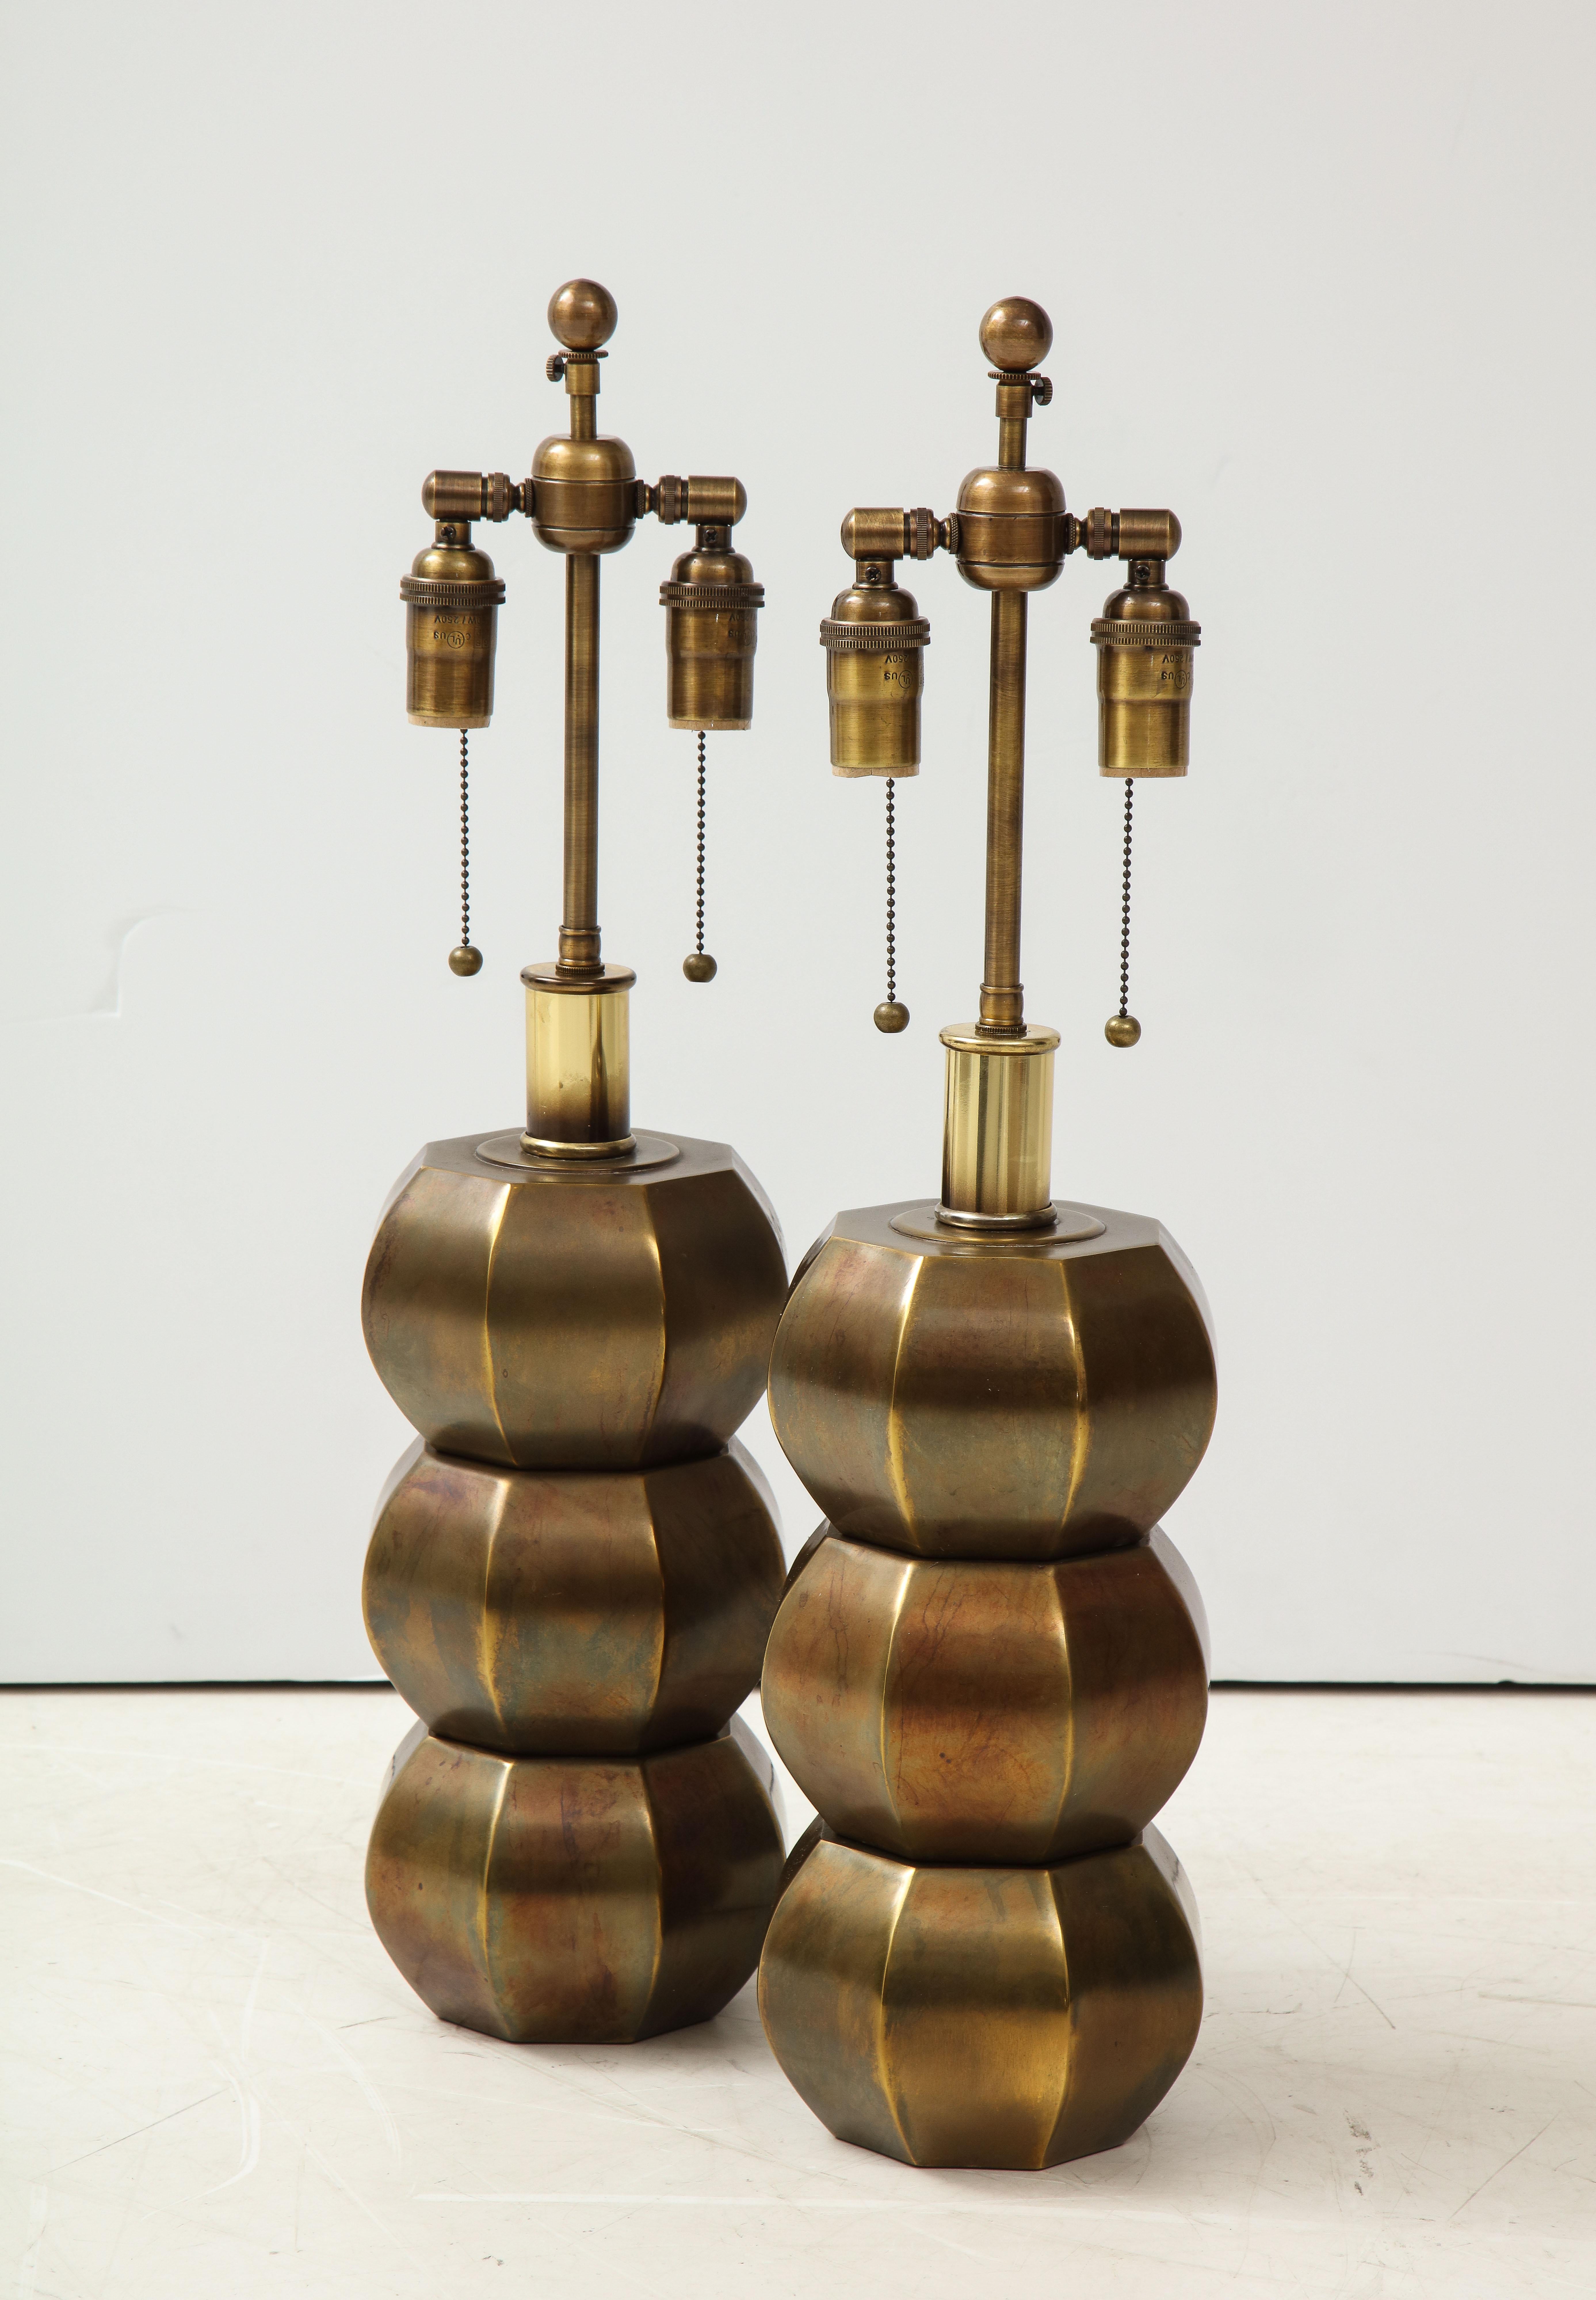 Stunning pair of rare faceted sphere lamps in an antique bronzed finish.
The lamps have been Newly rewired with rayon cords and adjustable Antique Bronze double clusters
that take standard light bulbs.